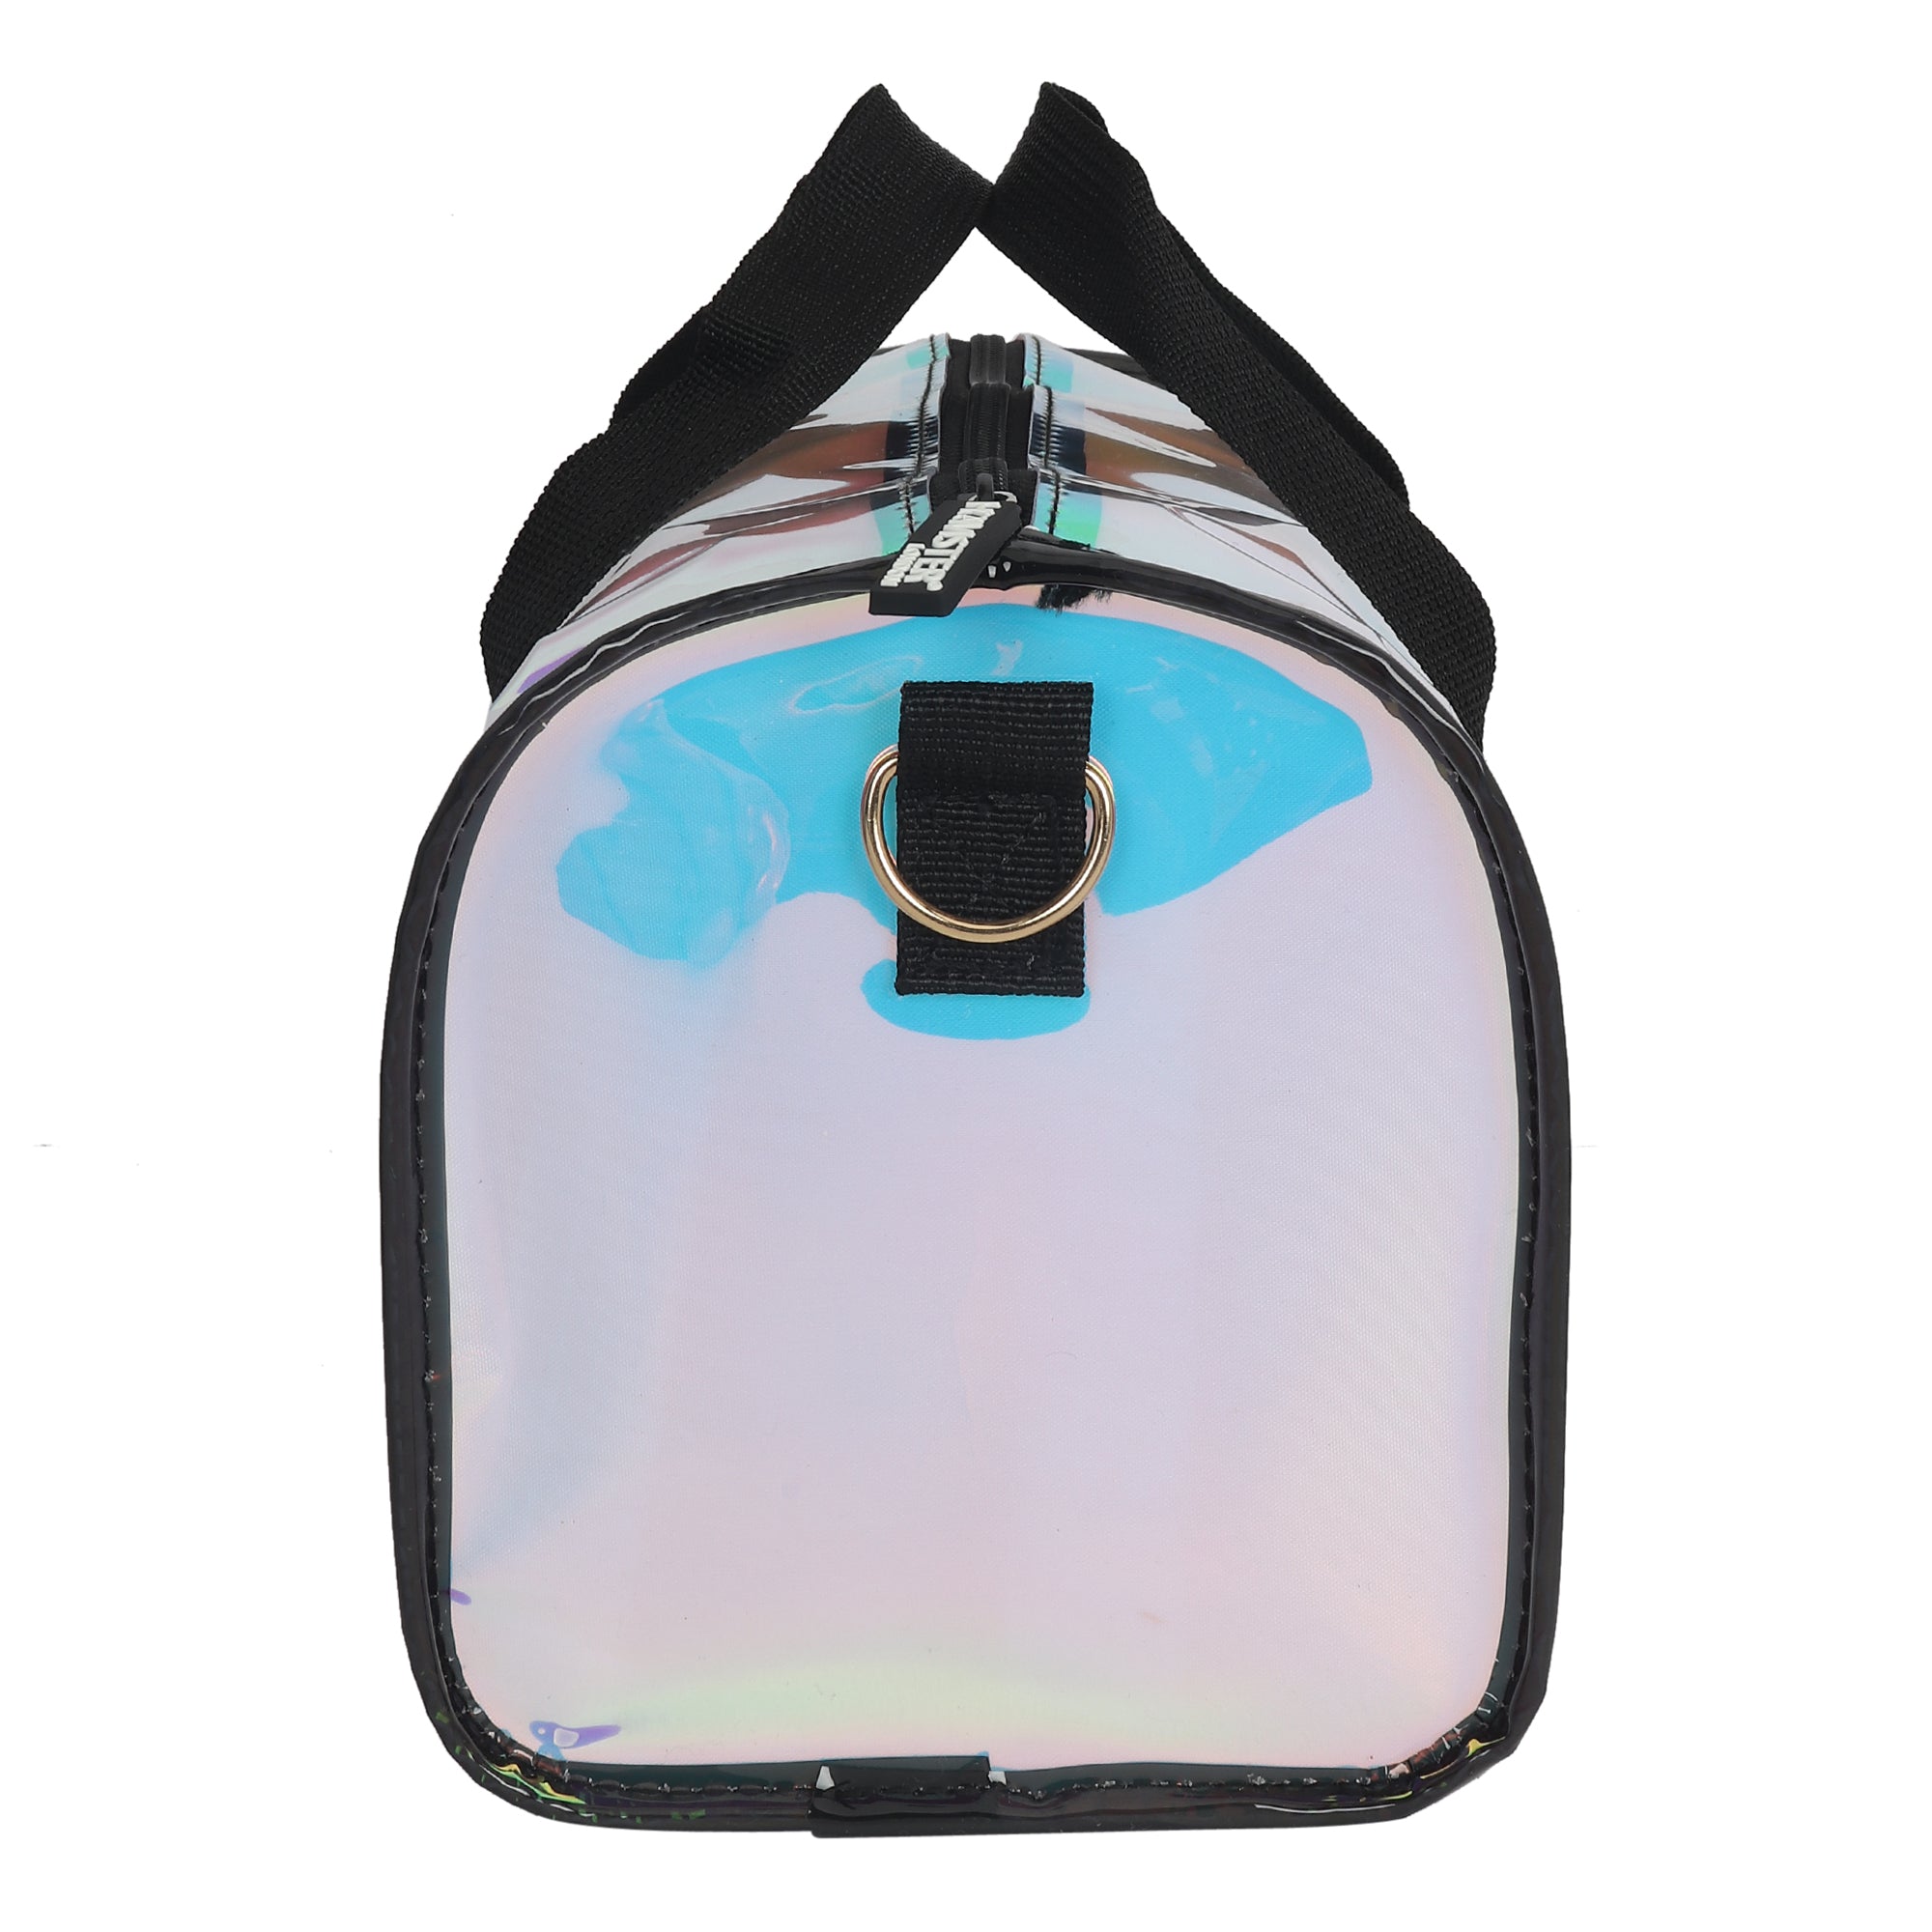 Large transparent pockets reduce leaks Transparent shoulder bags with  zipper closure Size L for swimming  Amazonin Bags Wallets and Luggage